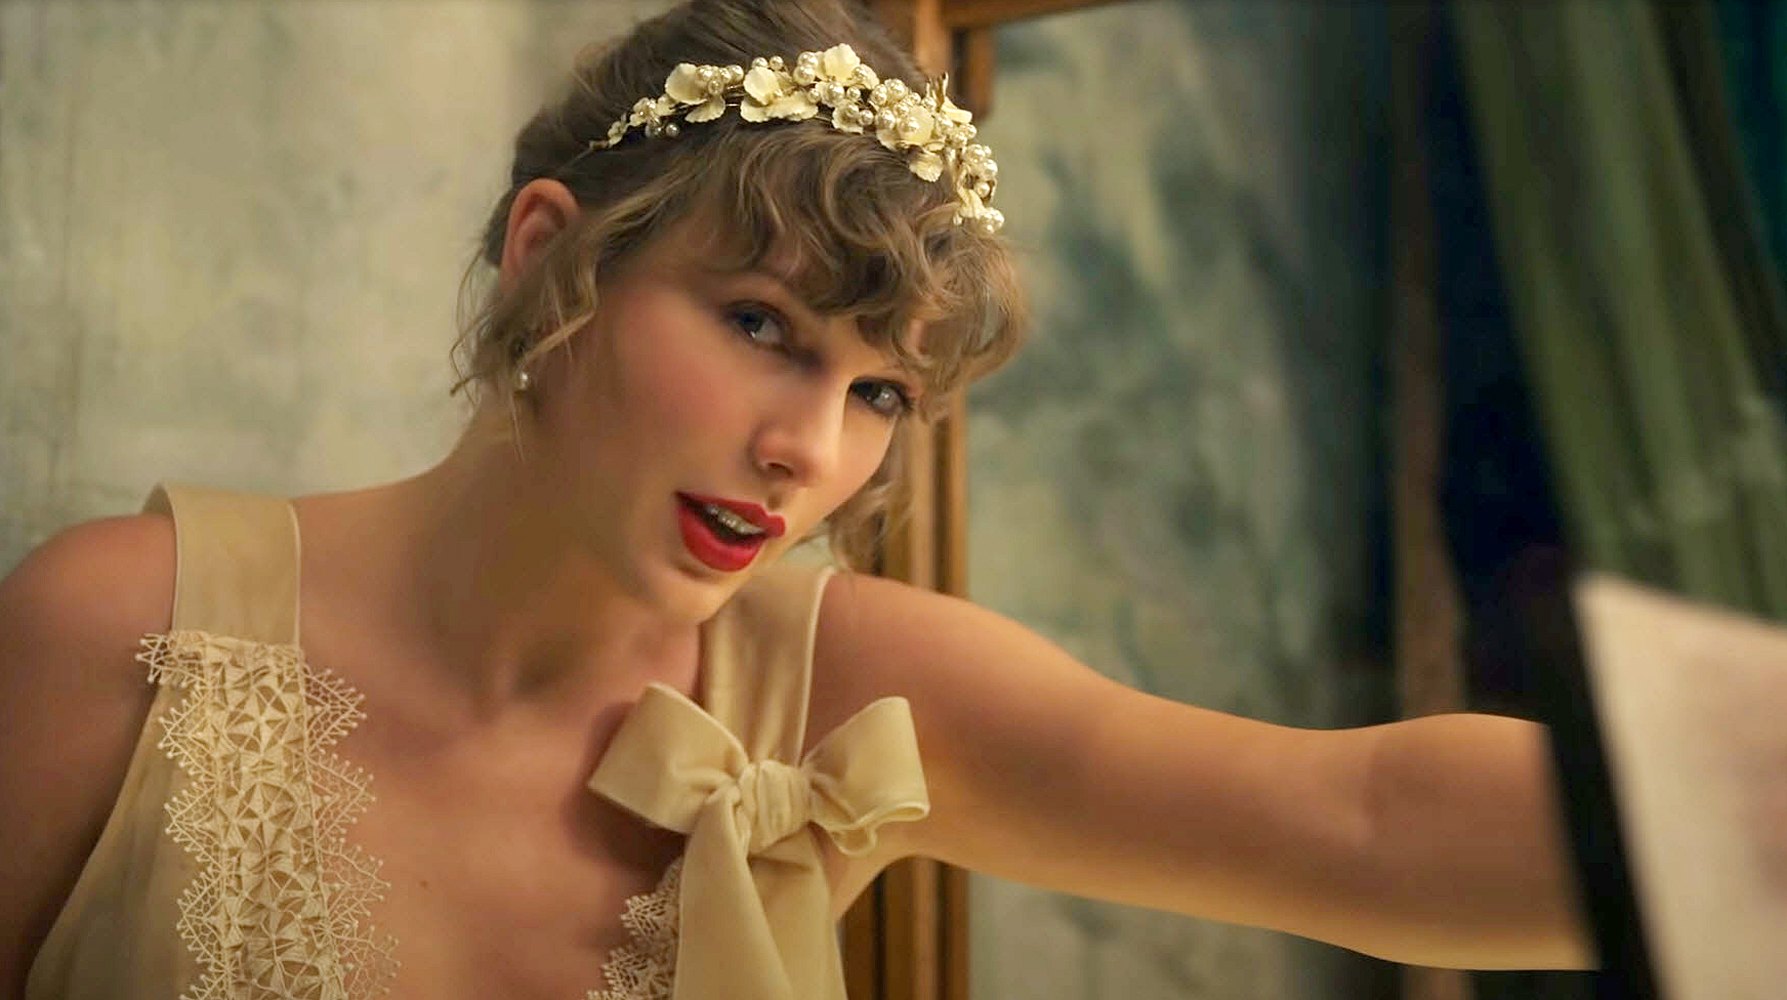 Taylor descending into a secret latch while wearing a wedding dress in the willow music video.